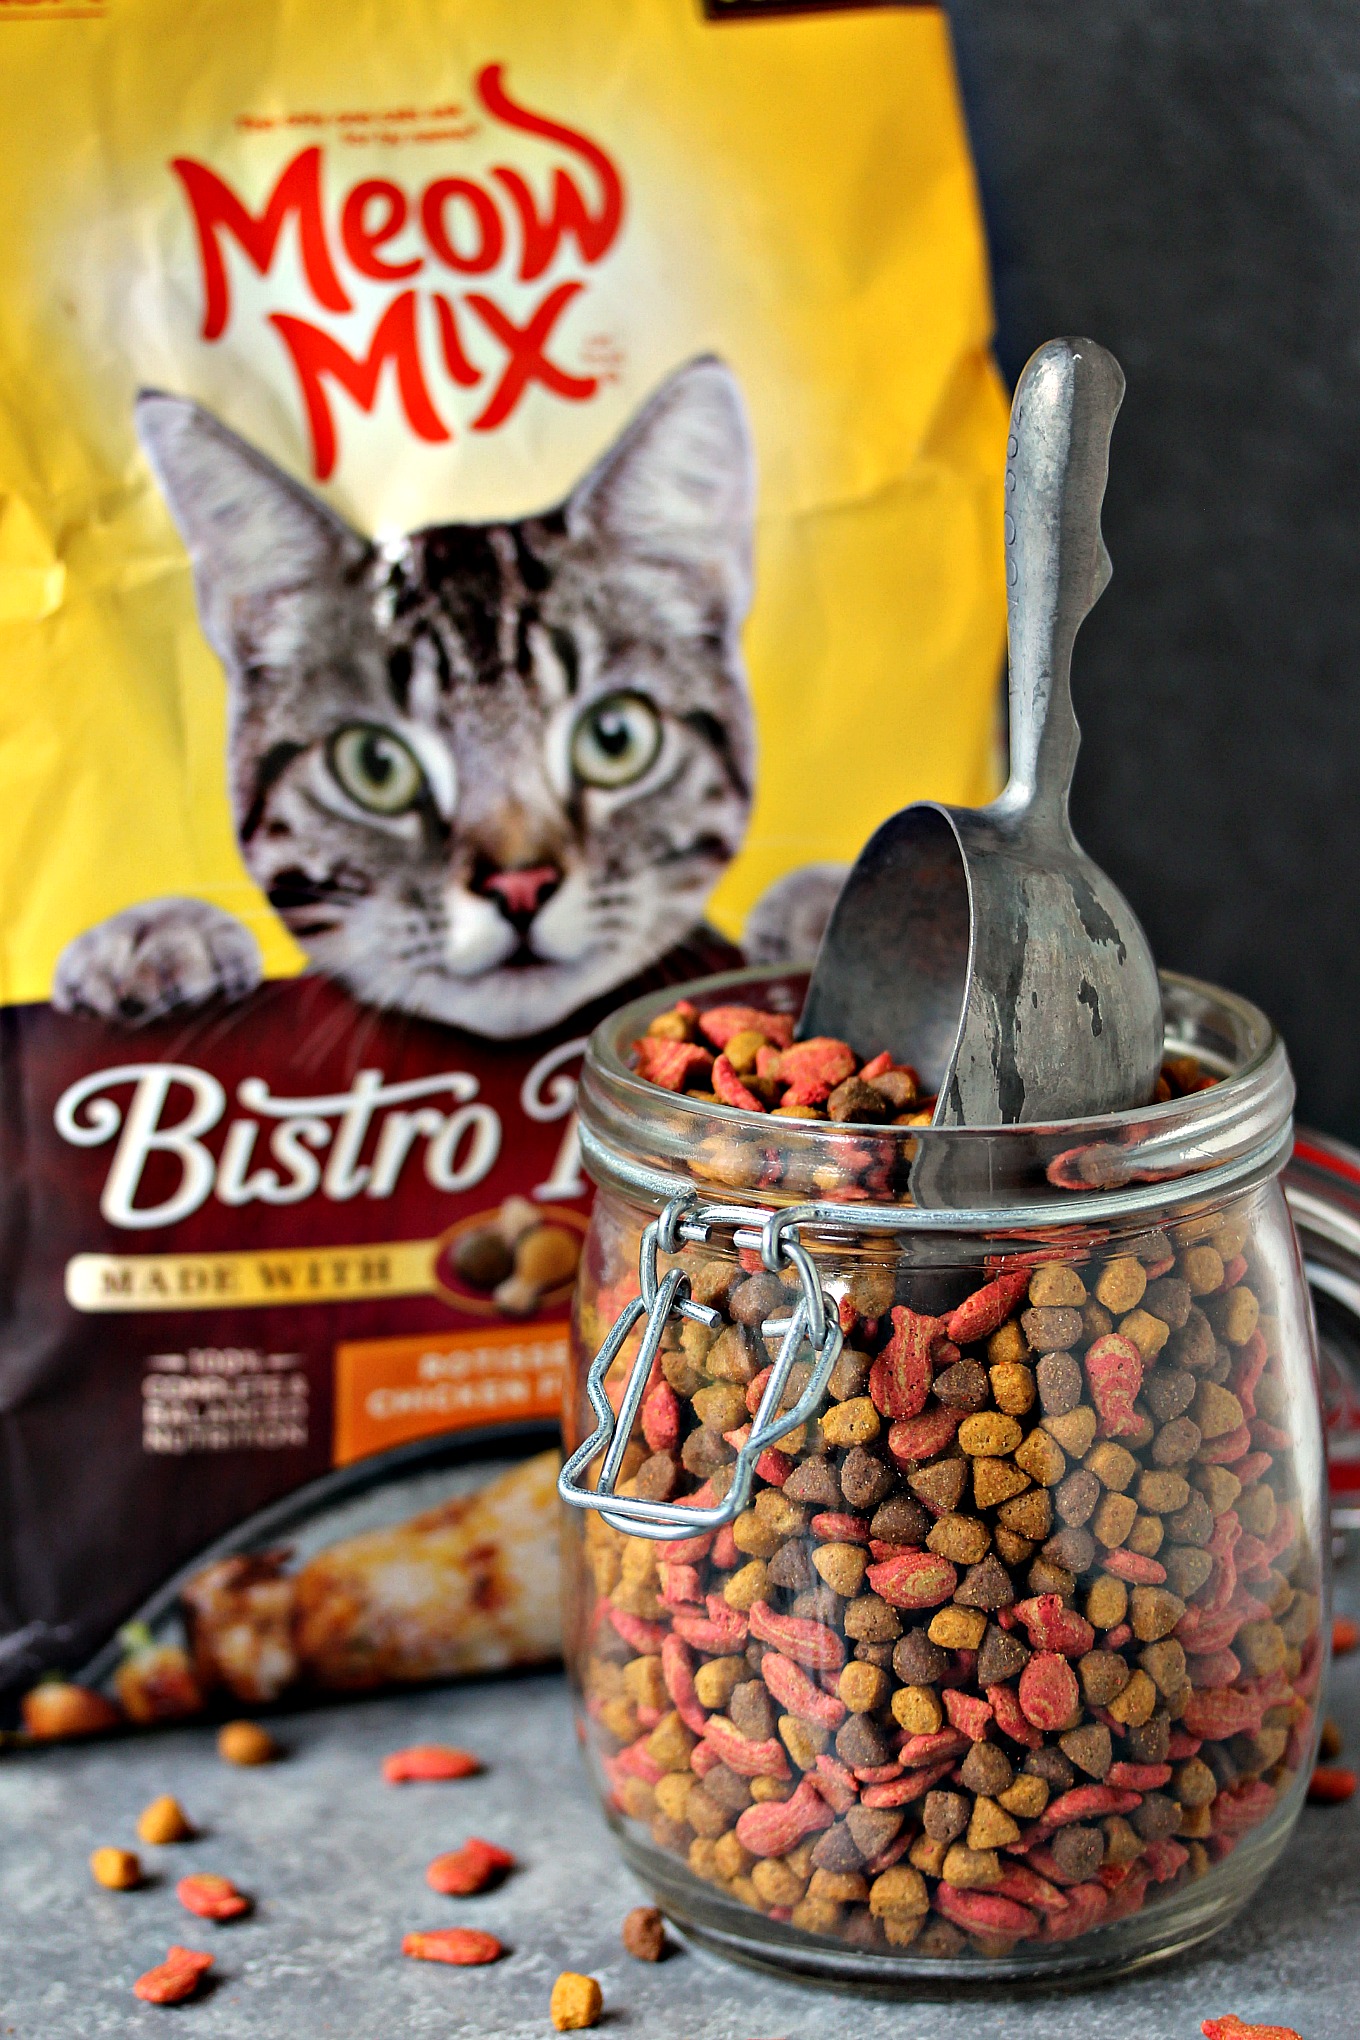 Meow Mix Bistro and Why I'm a Cat Obsessed